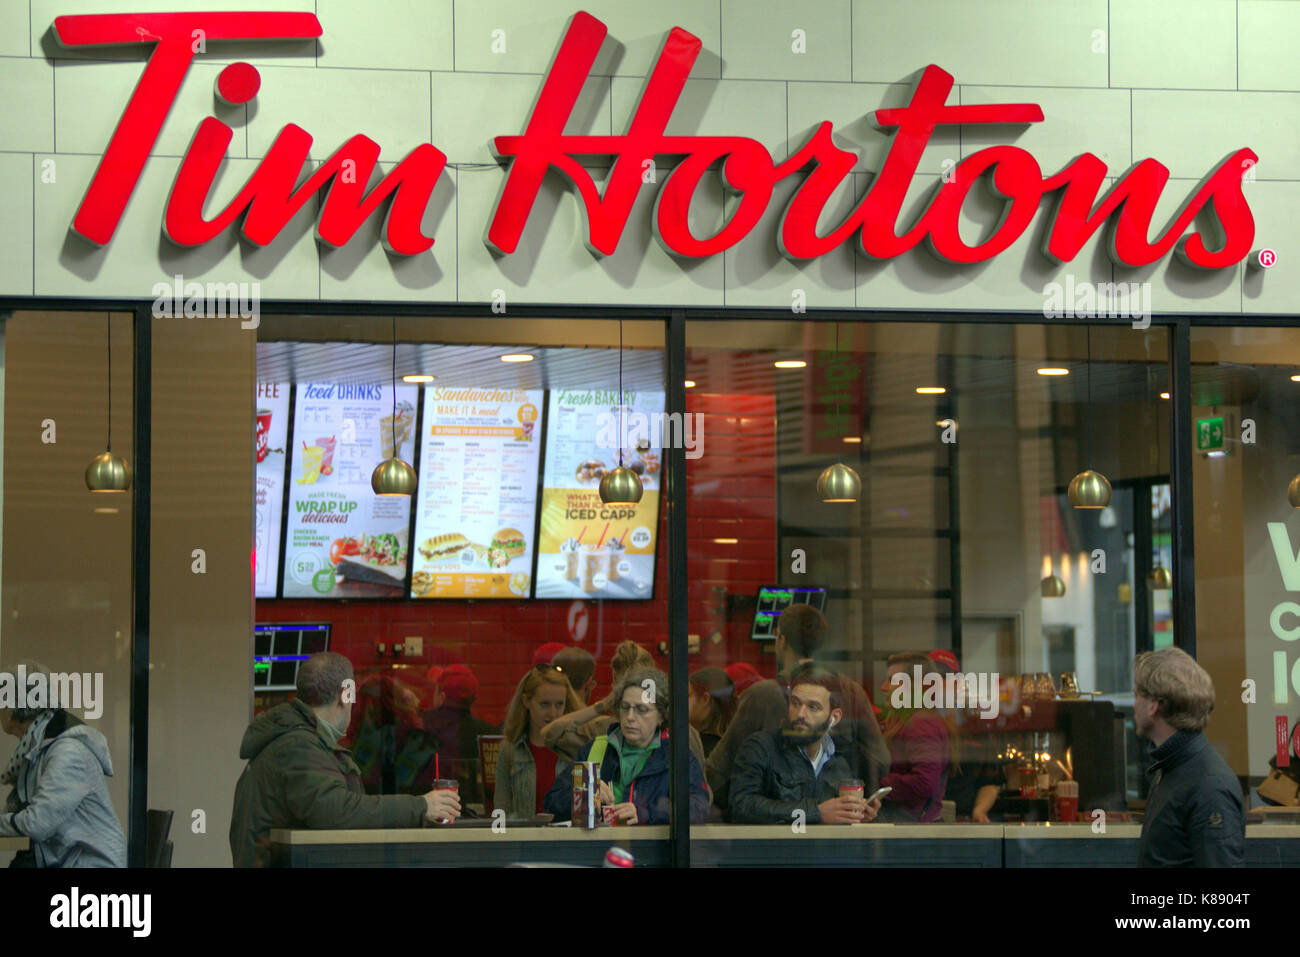 Tim Hortons donut Canadian multinational fast food restaurant known for its coffee and donuts shop coffee bar the first in the UK om Glasgow Stock Photo